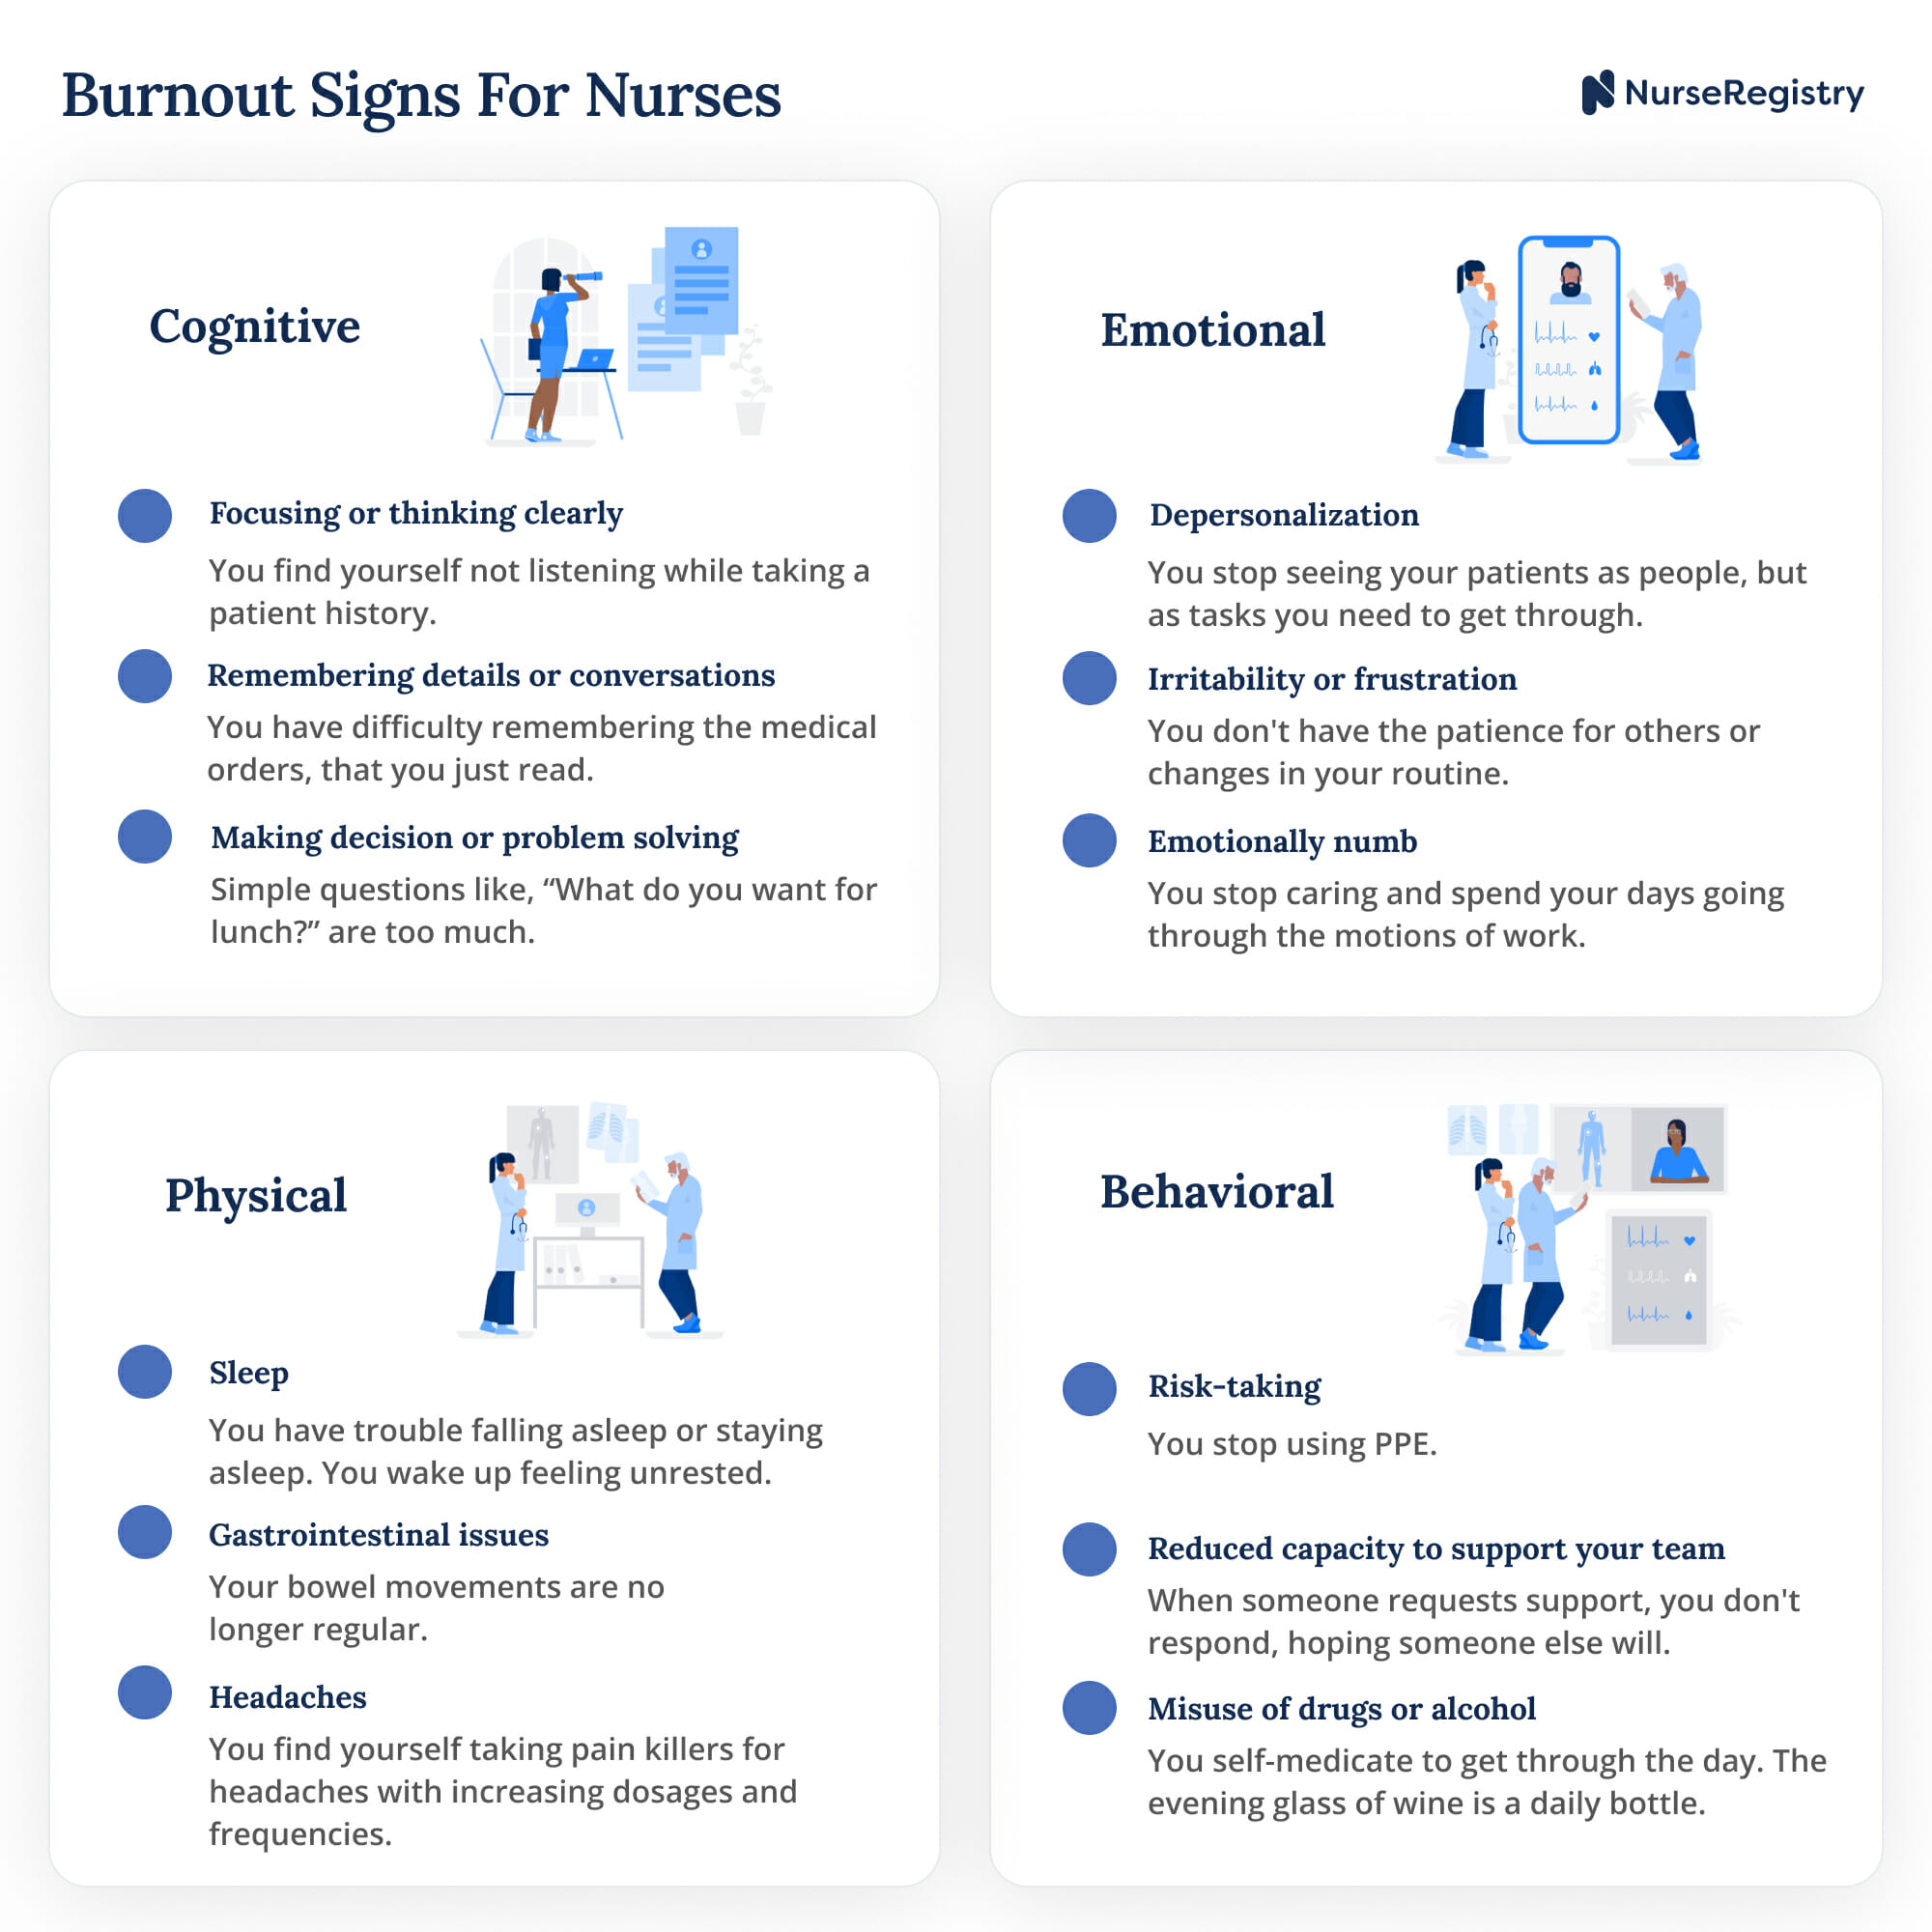 Nurse Burnout: Symptoms, Causes and Recovery